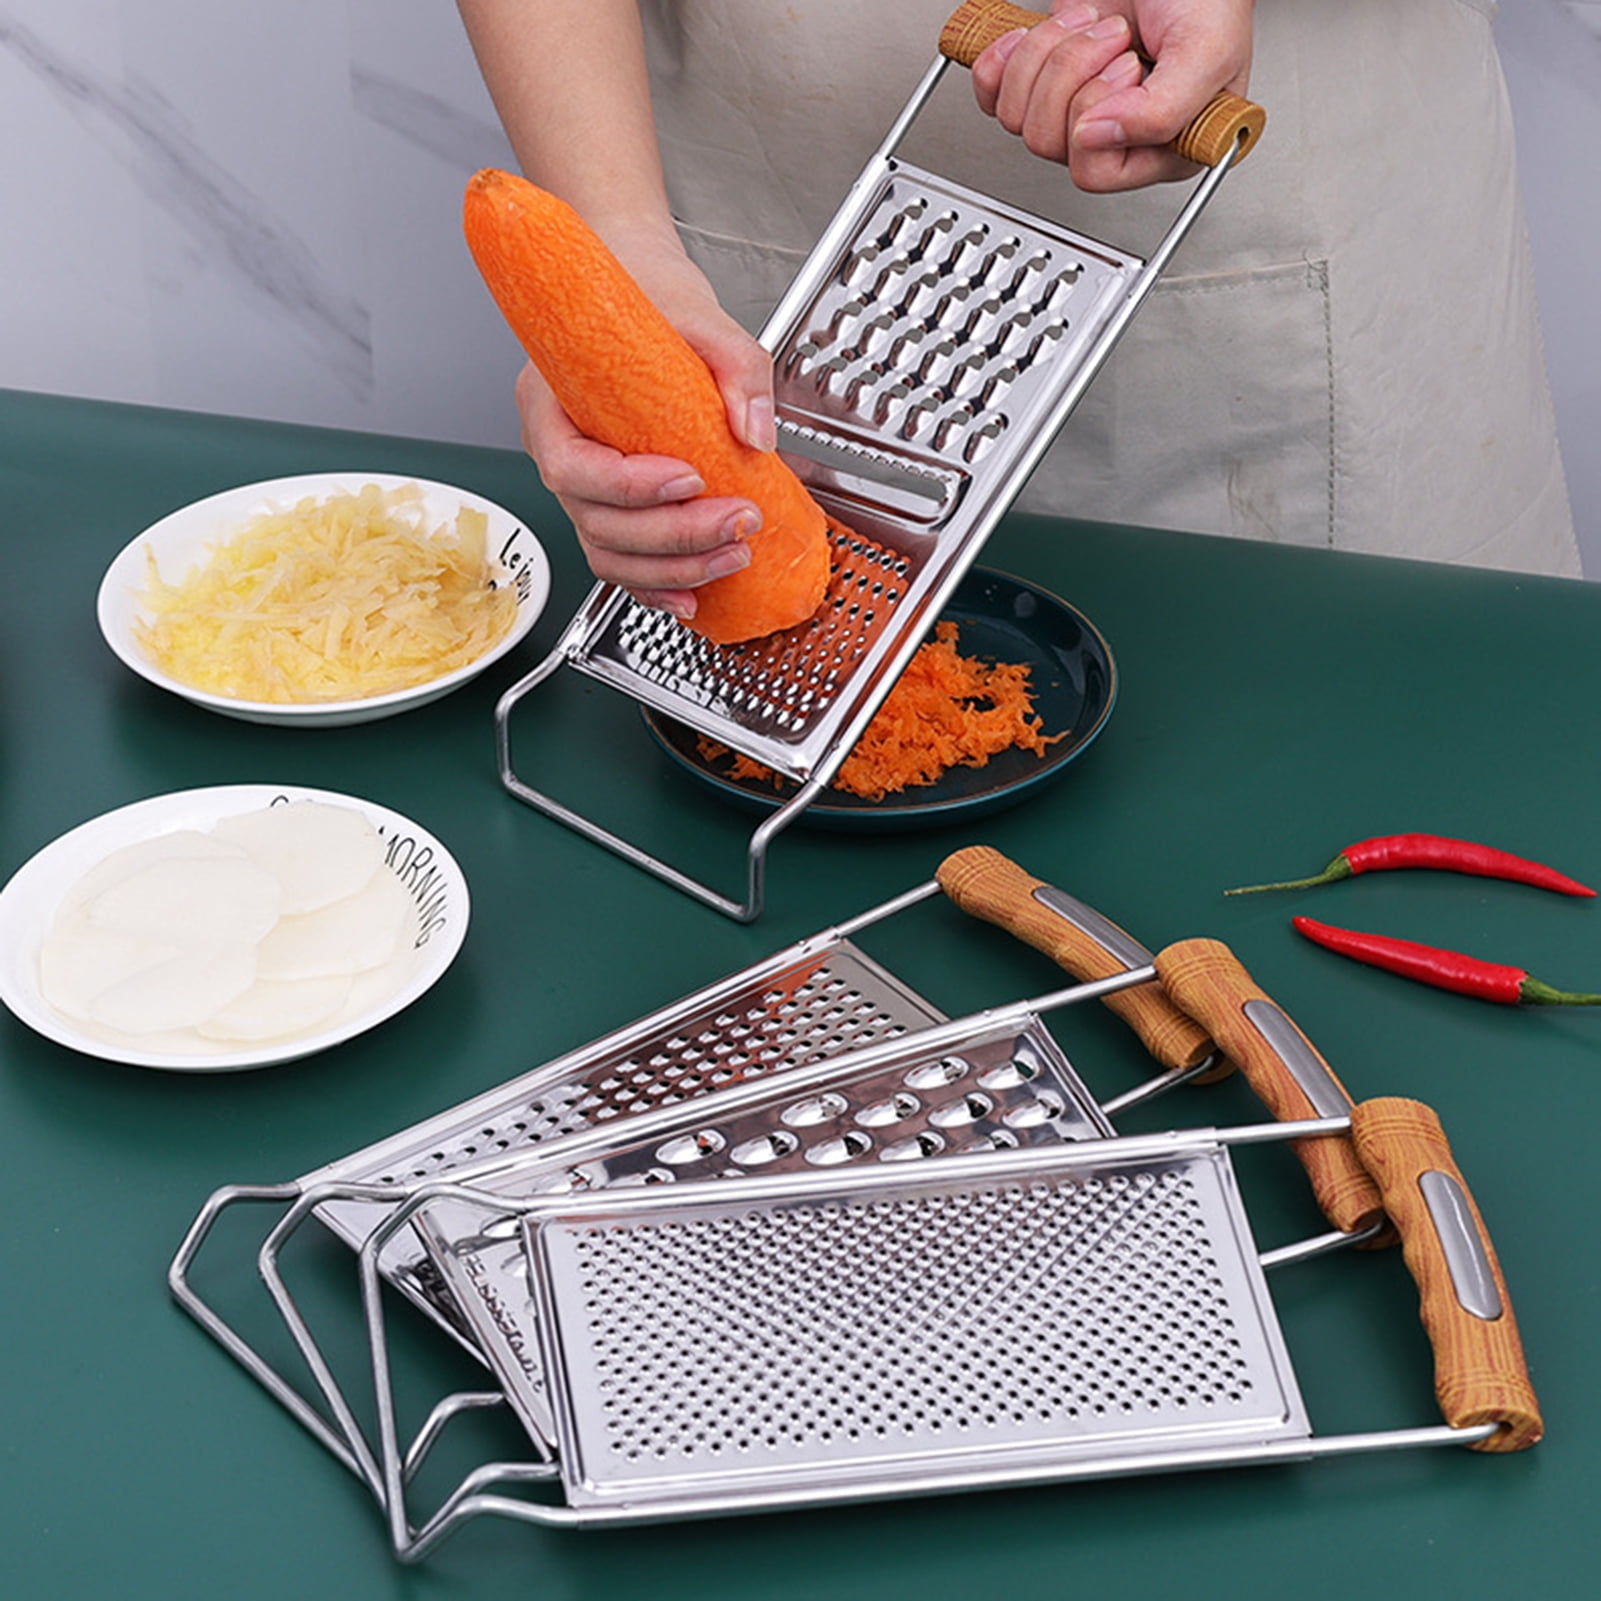  Cheese Grater With Container, Handheld Vegetable Slicer Grater  With Container, Veggie Cutter Food Chopper, Fruit Slicer Cutter Chopper  Grater, Kitchen Stainless Steel Vegetable Cutter: Home & Kitchen